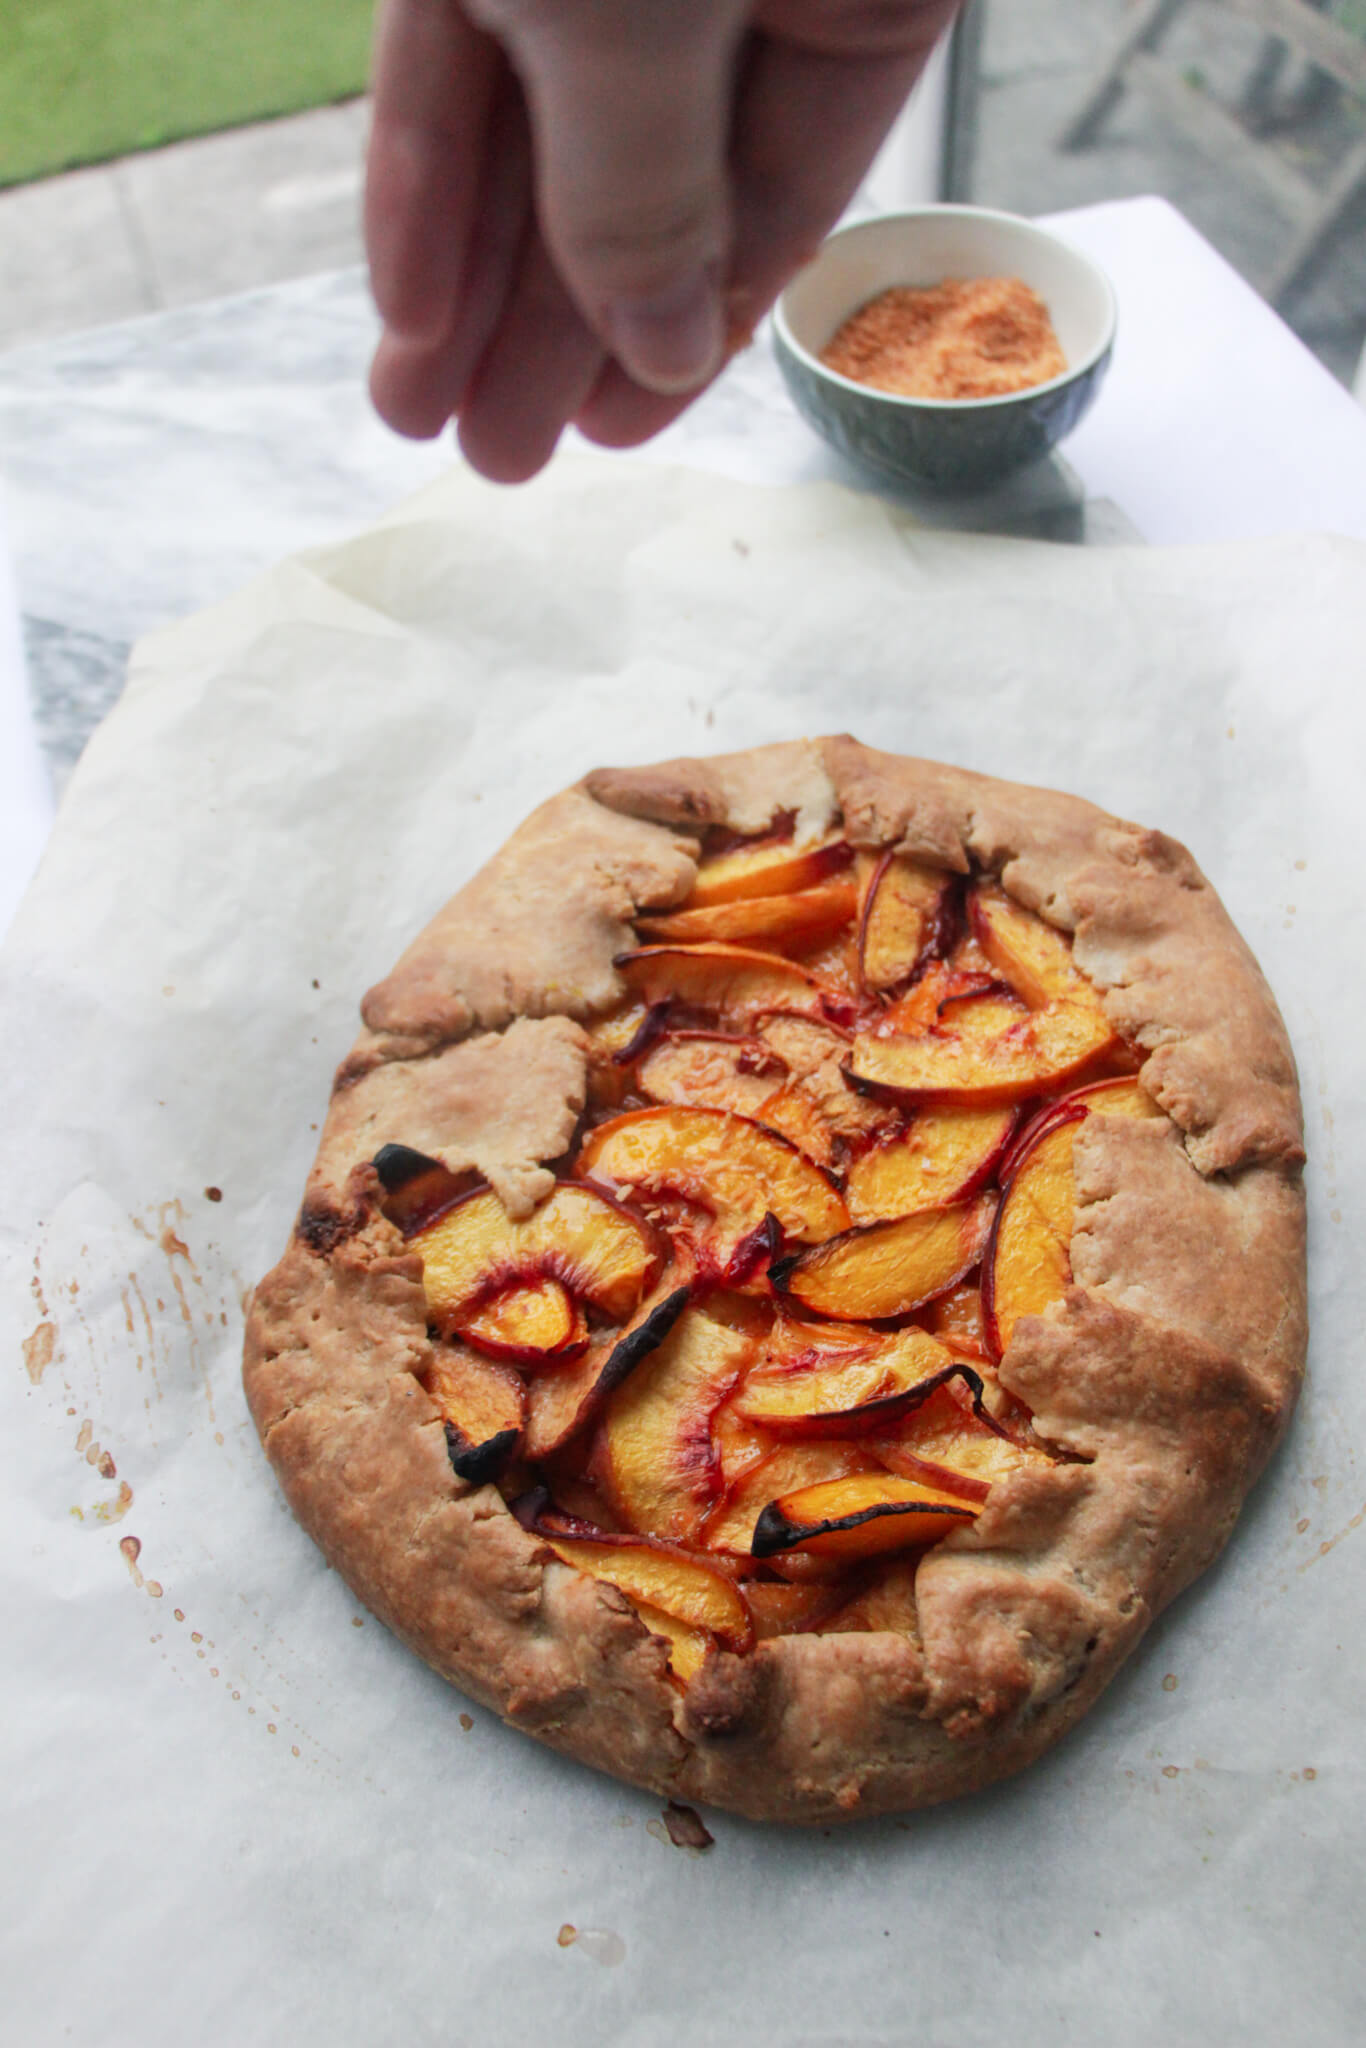 Hand sprinkling toasted coconut over peach galette.